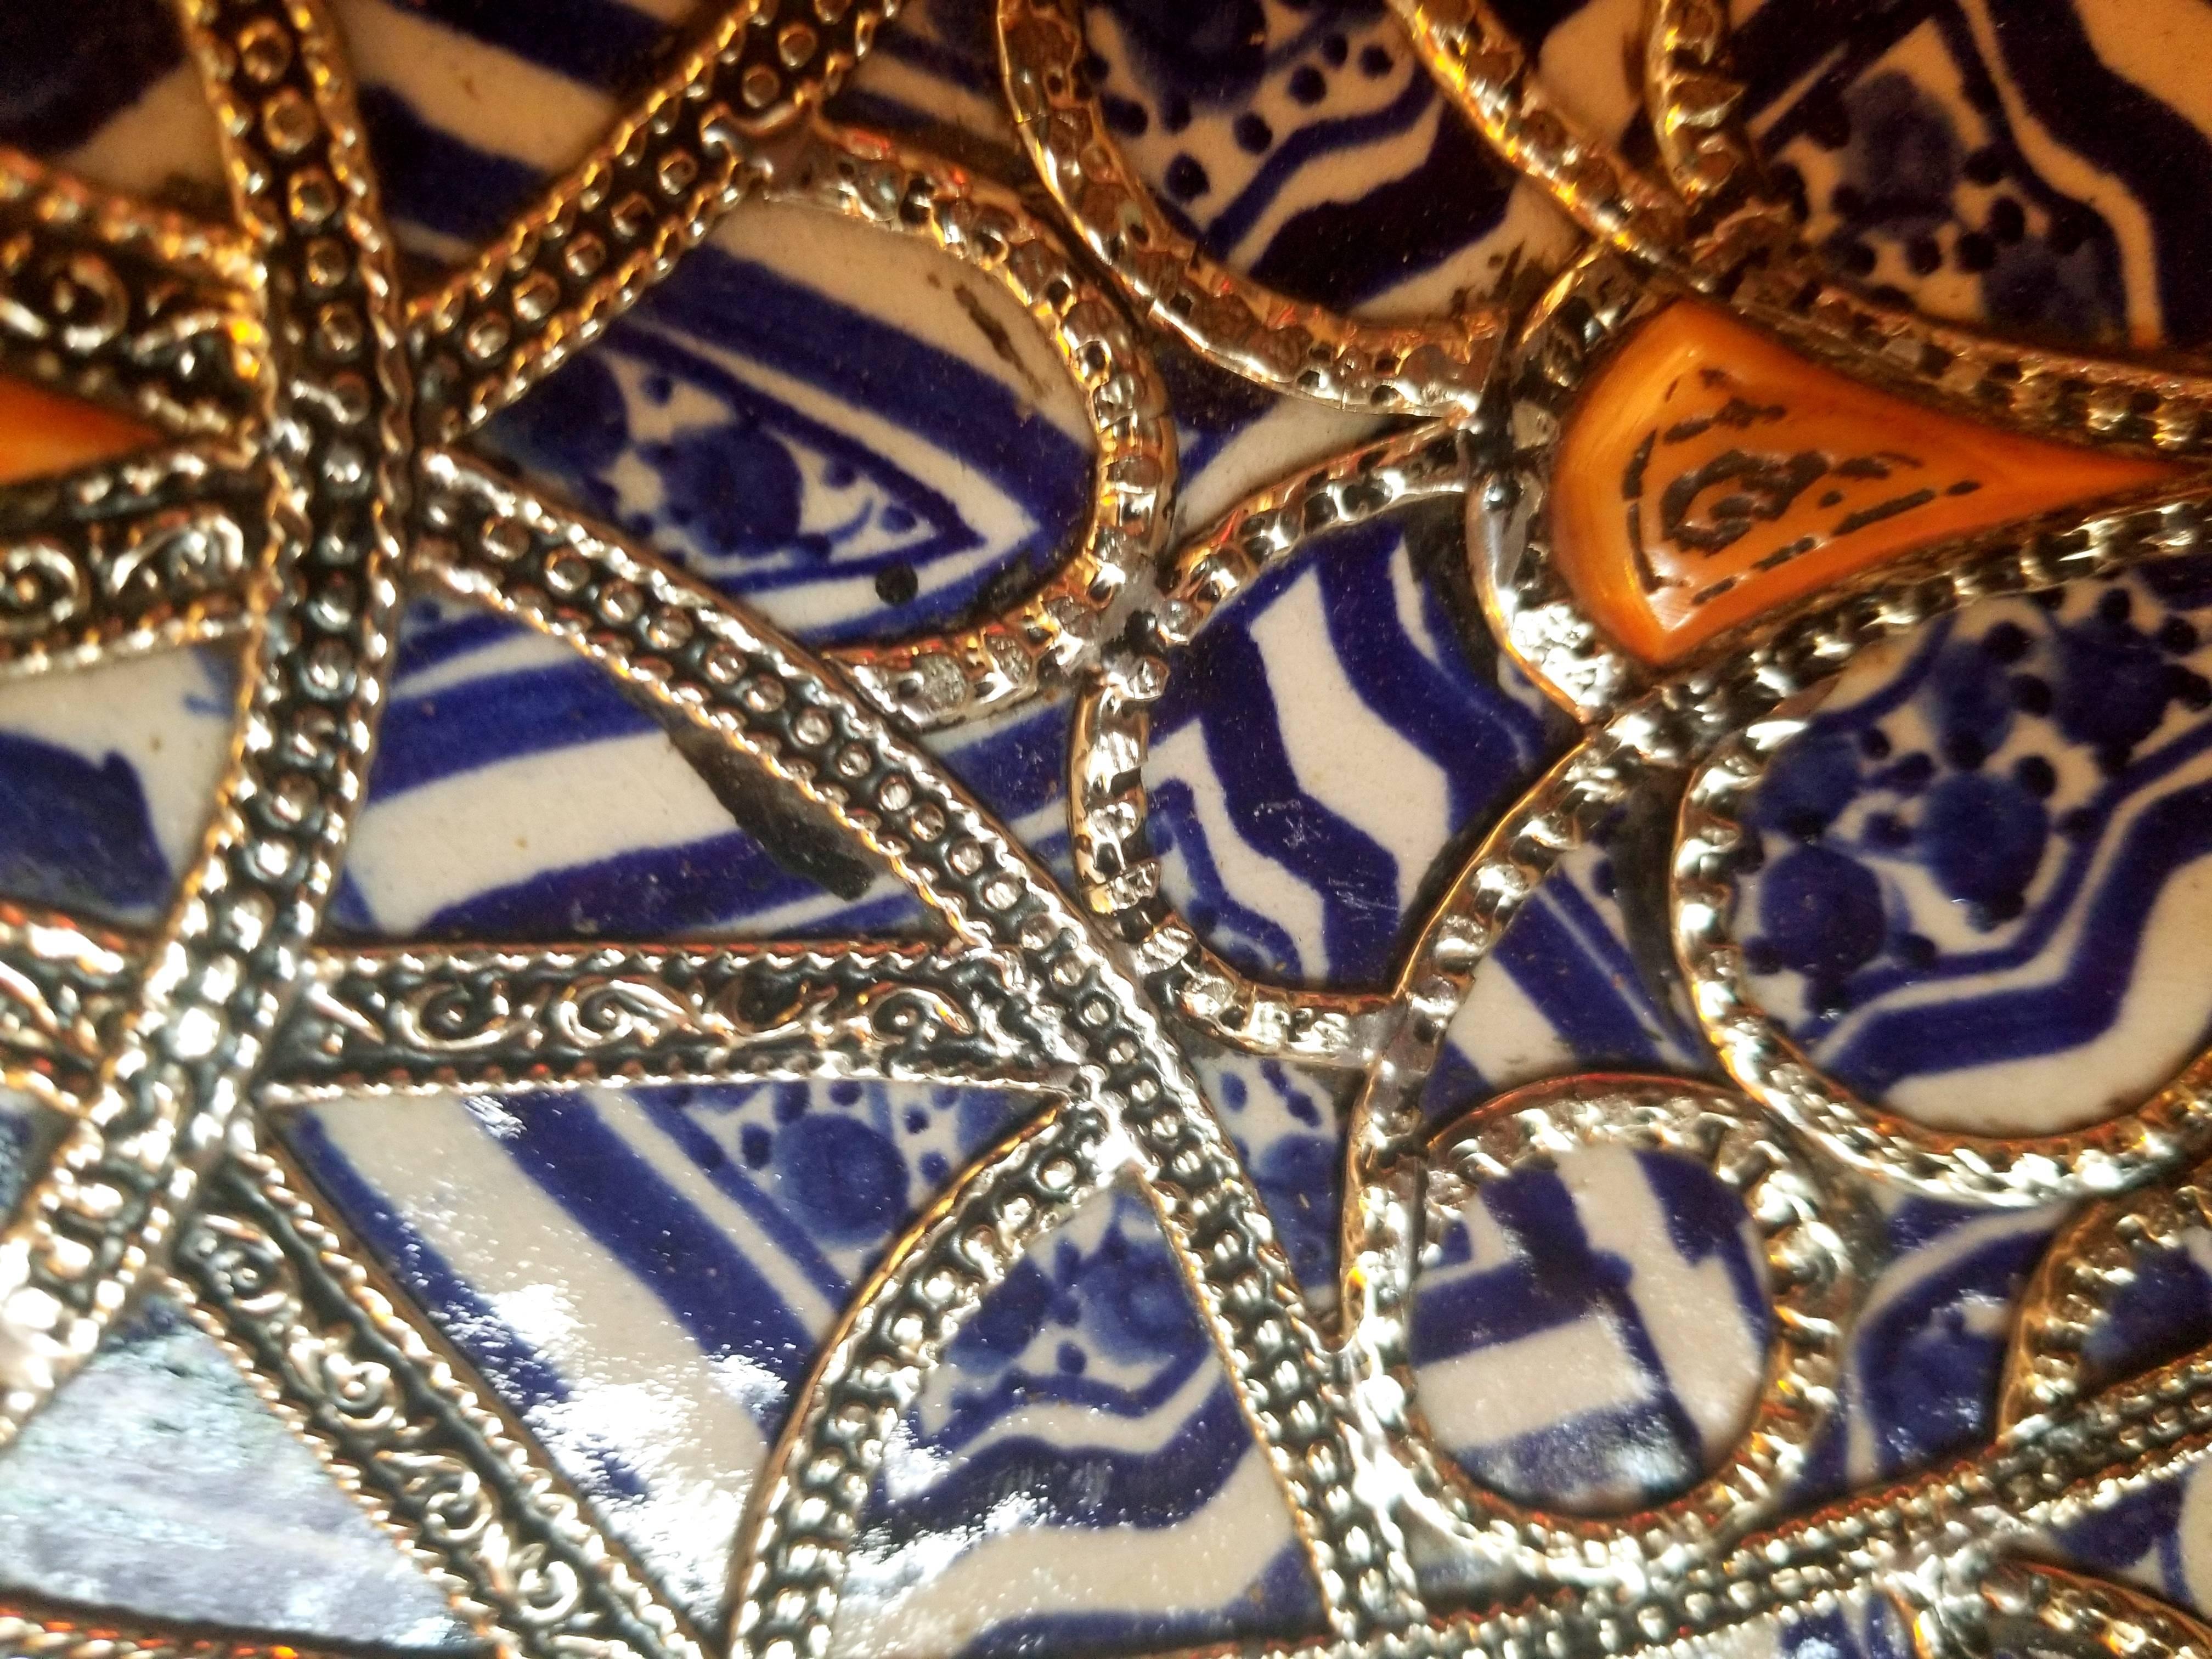 Metal and Camel Bone Inlaid Moroccan Hand-Painted Plate - Blue / White For Sale 2